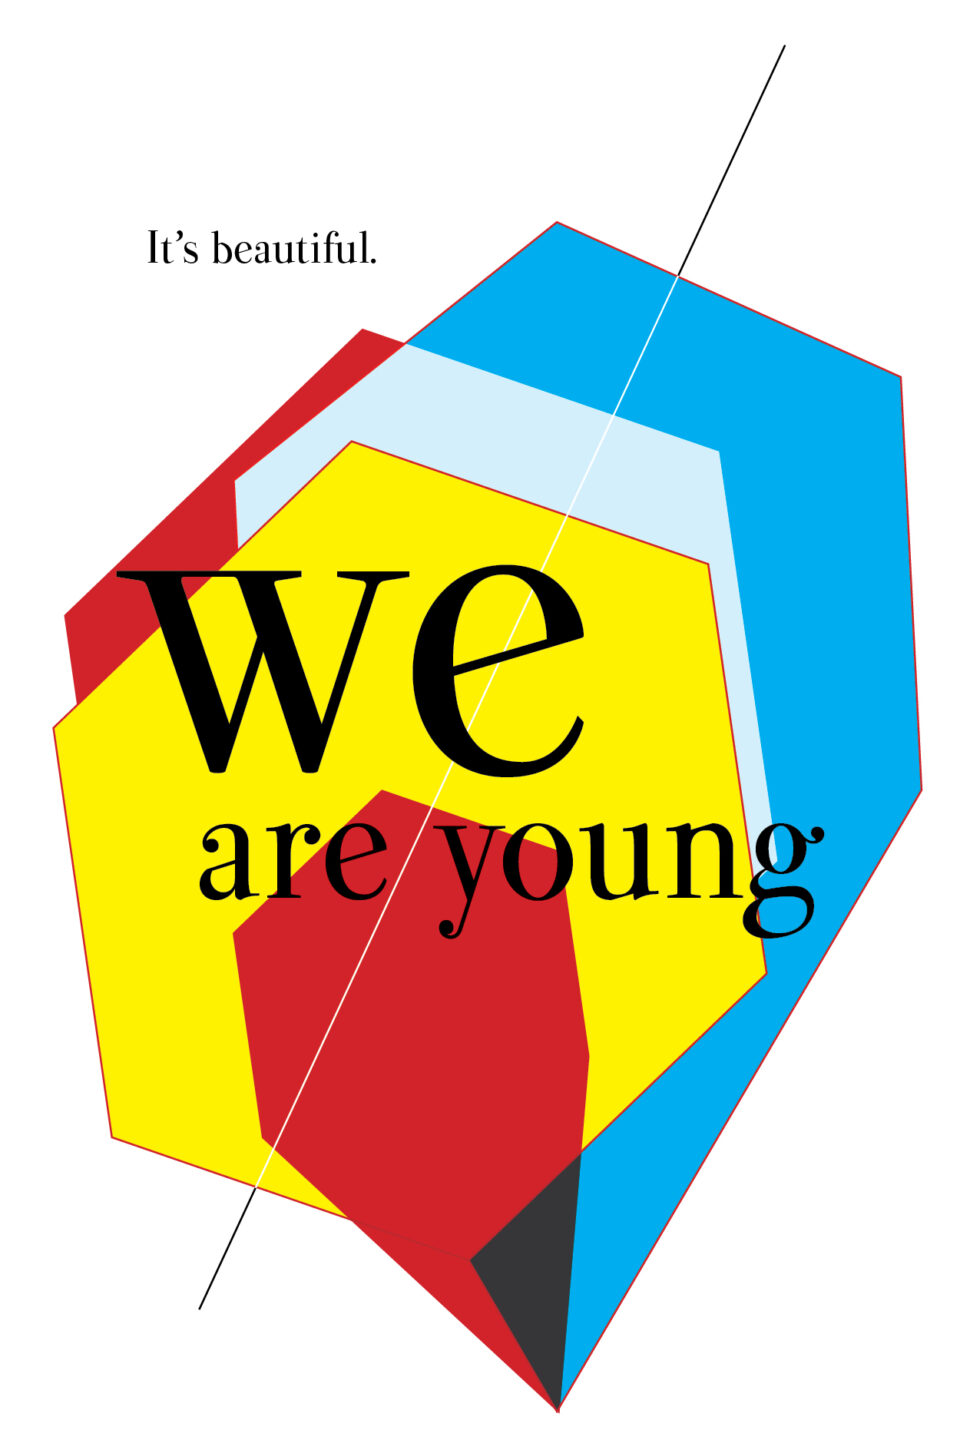 We are young Original prints by Giovanni Ambrosio